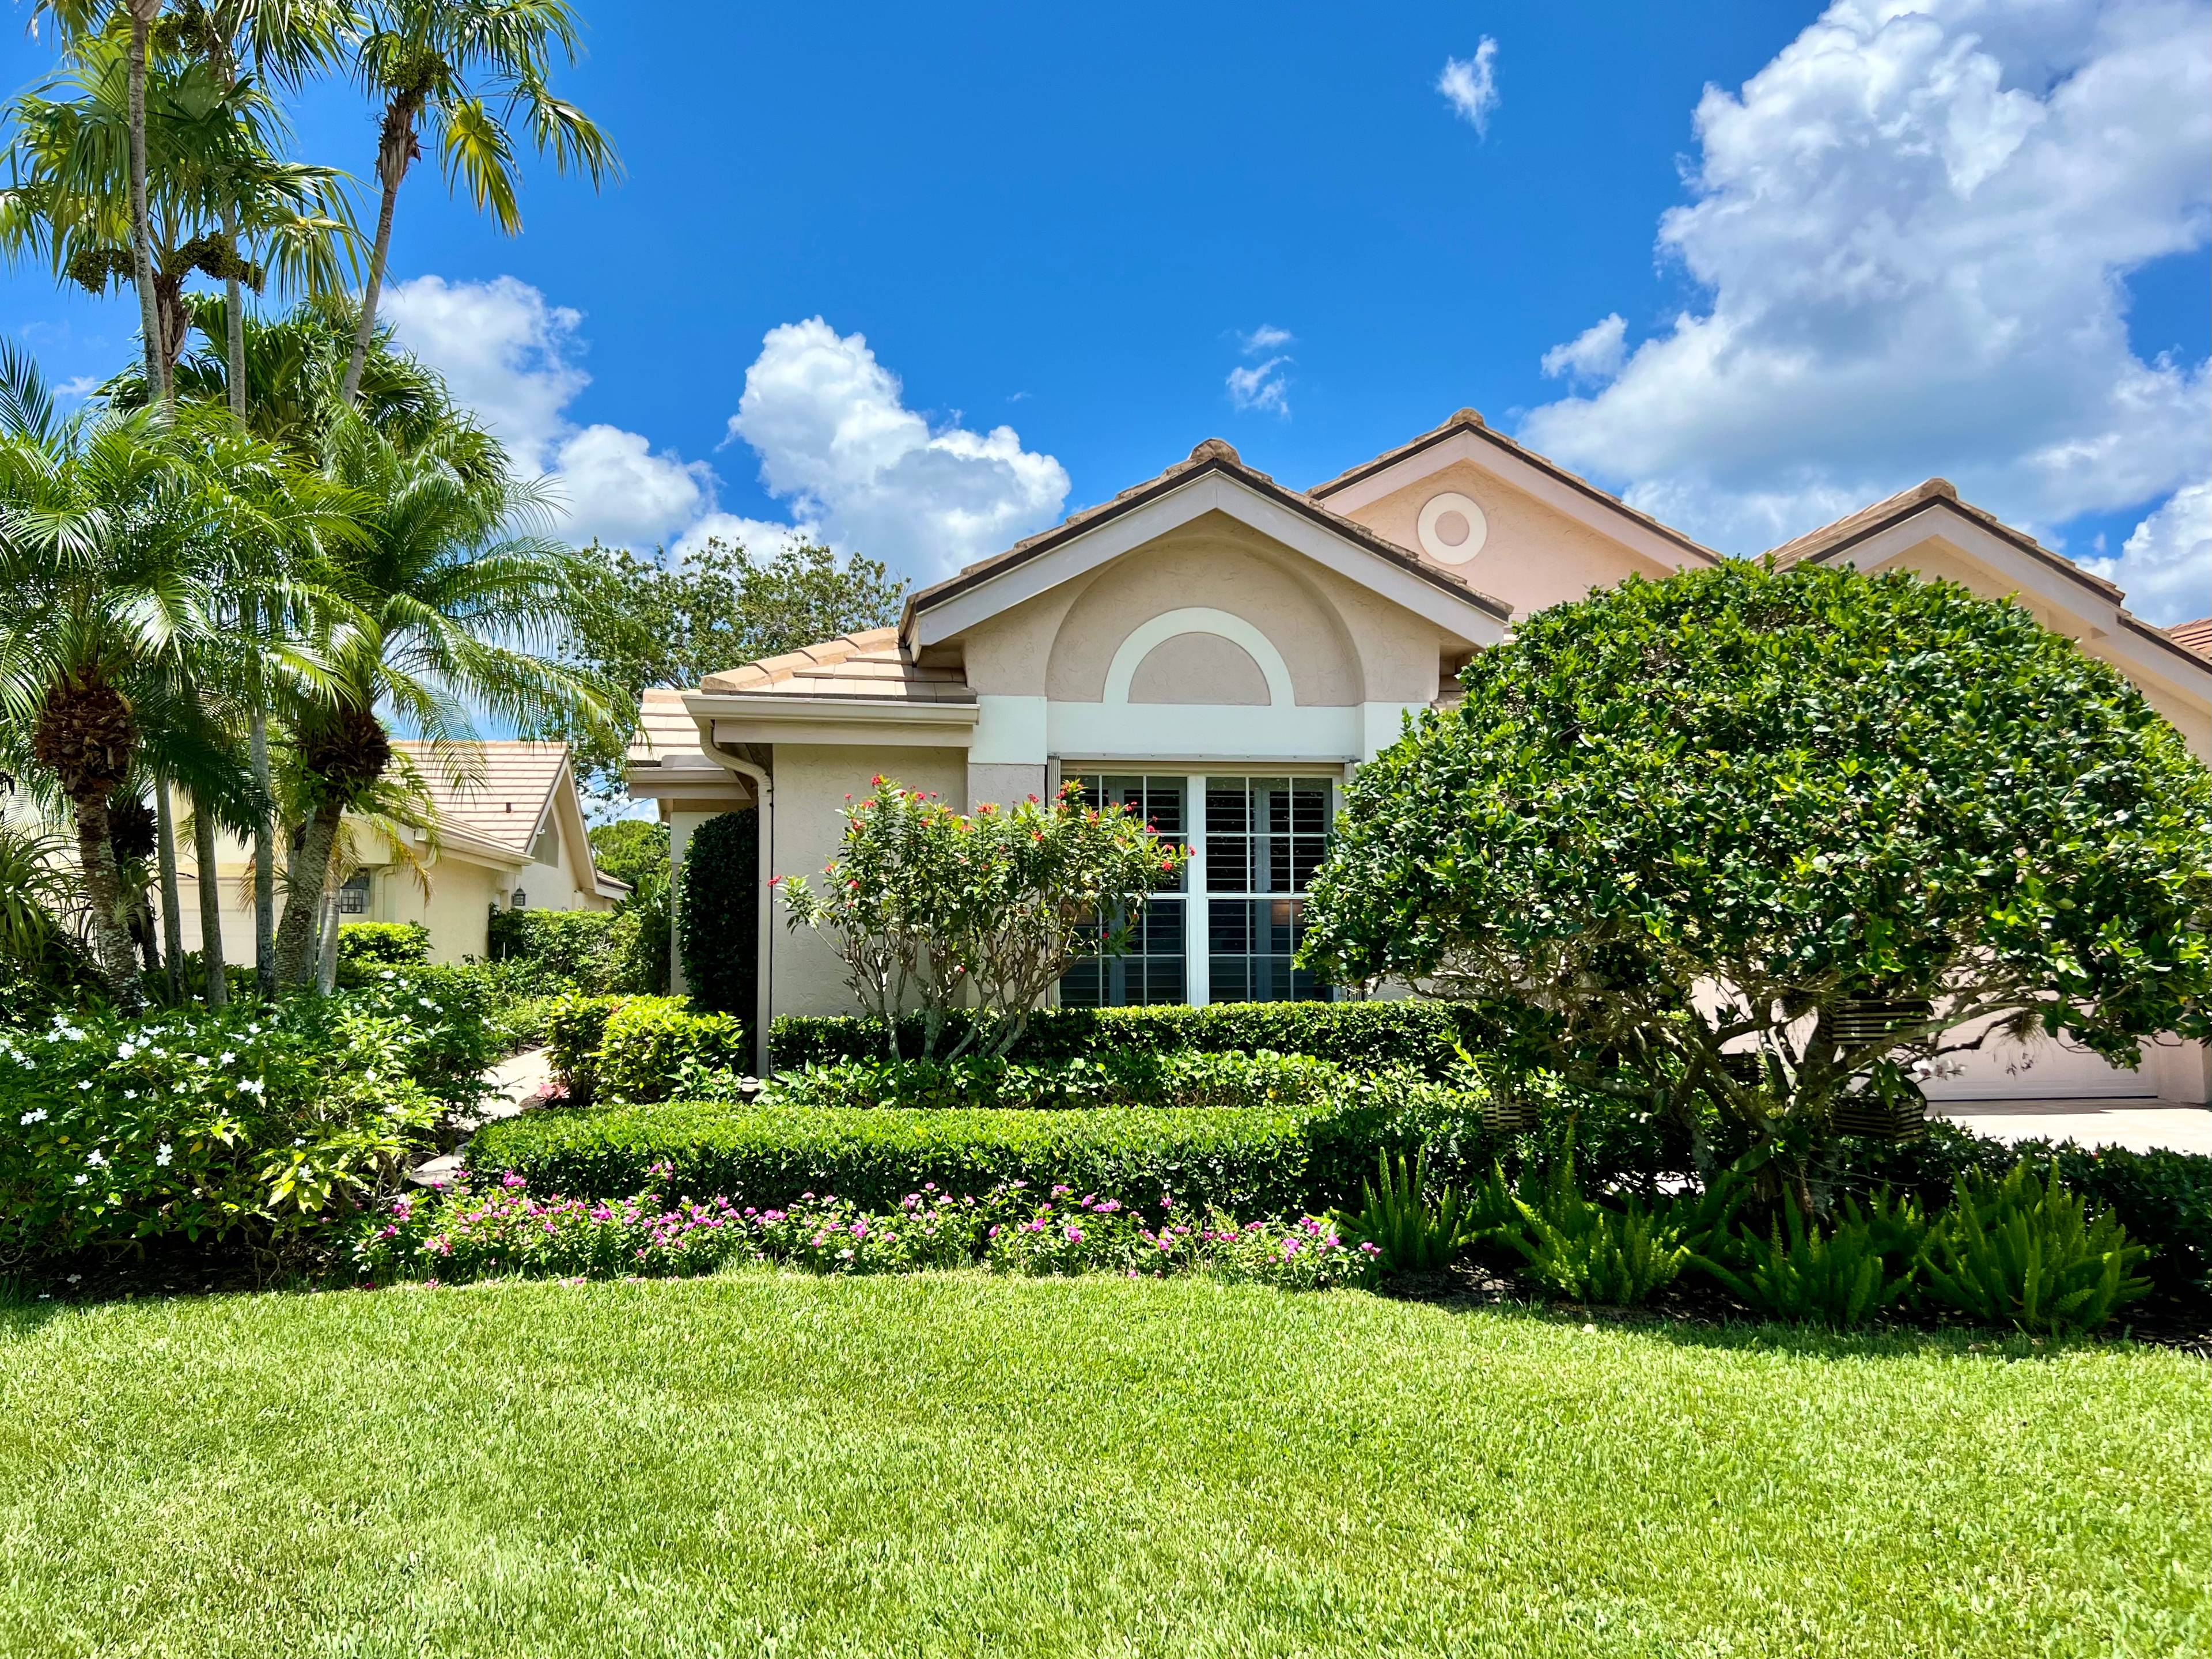 New Listing in Jonathan's Landing Jupiter, Fl. 3 bedrooms, 2.5 baths, private pool with water view